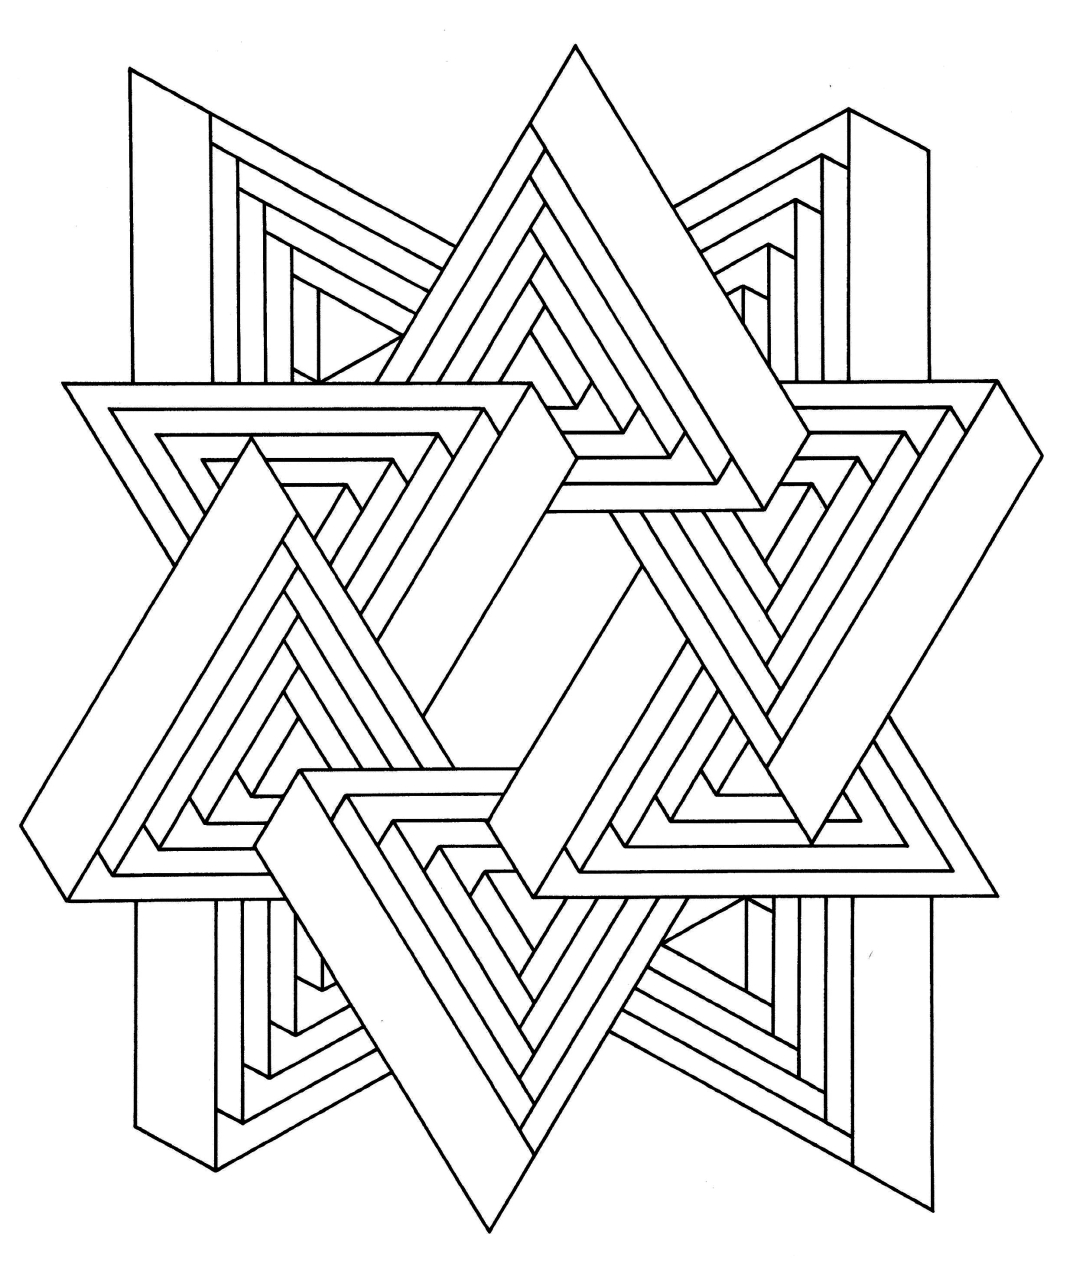 Geometric Triangle Coloring Page - Free Printable Coloring Pages for Kids